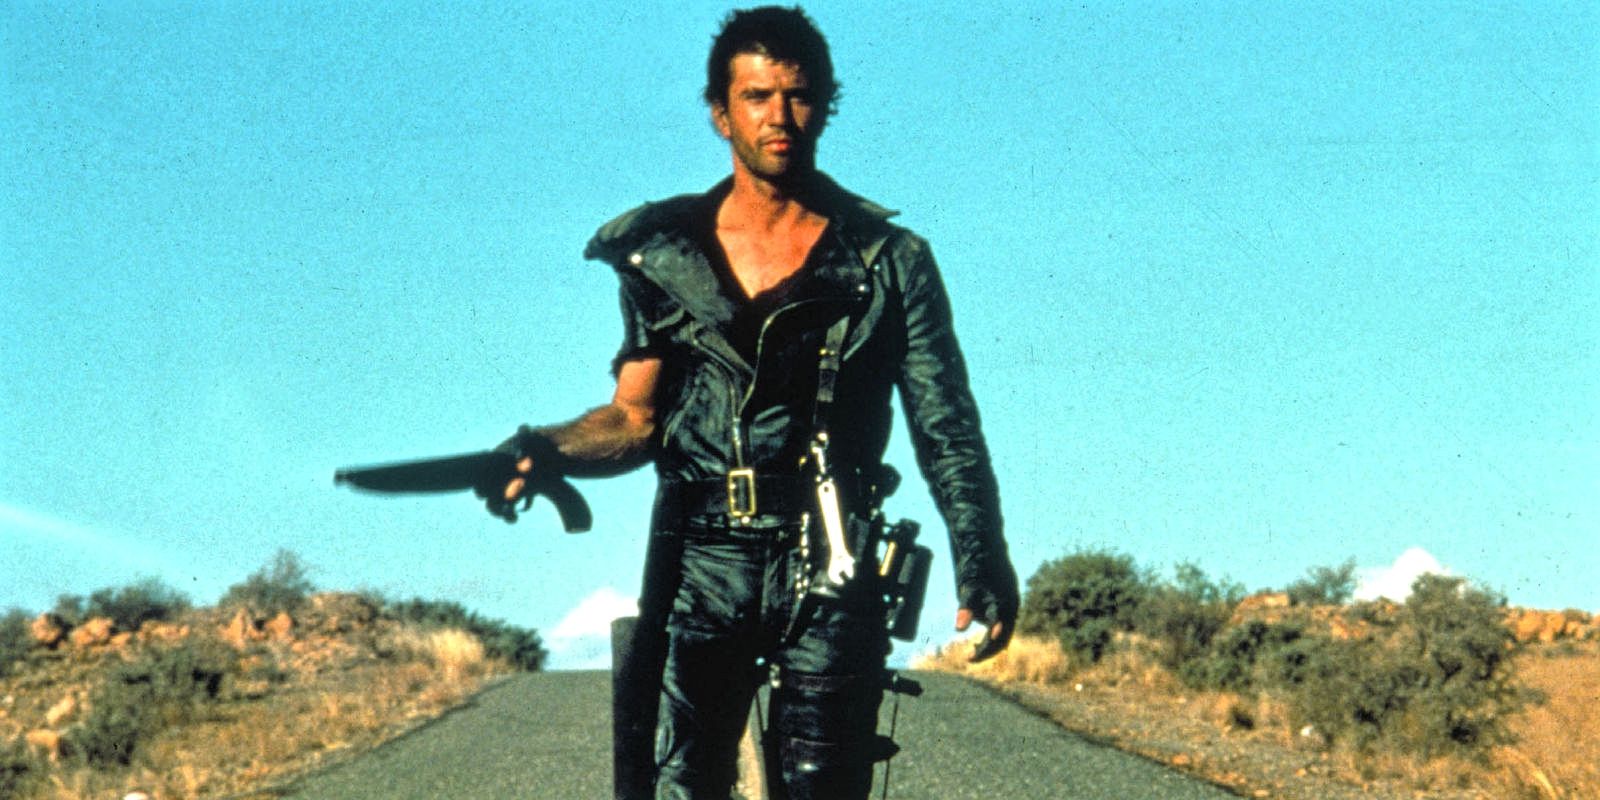 mad max 2 rotten tomatoes